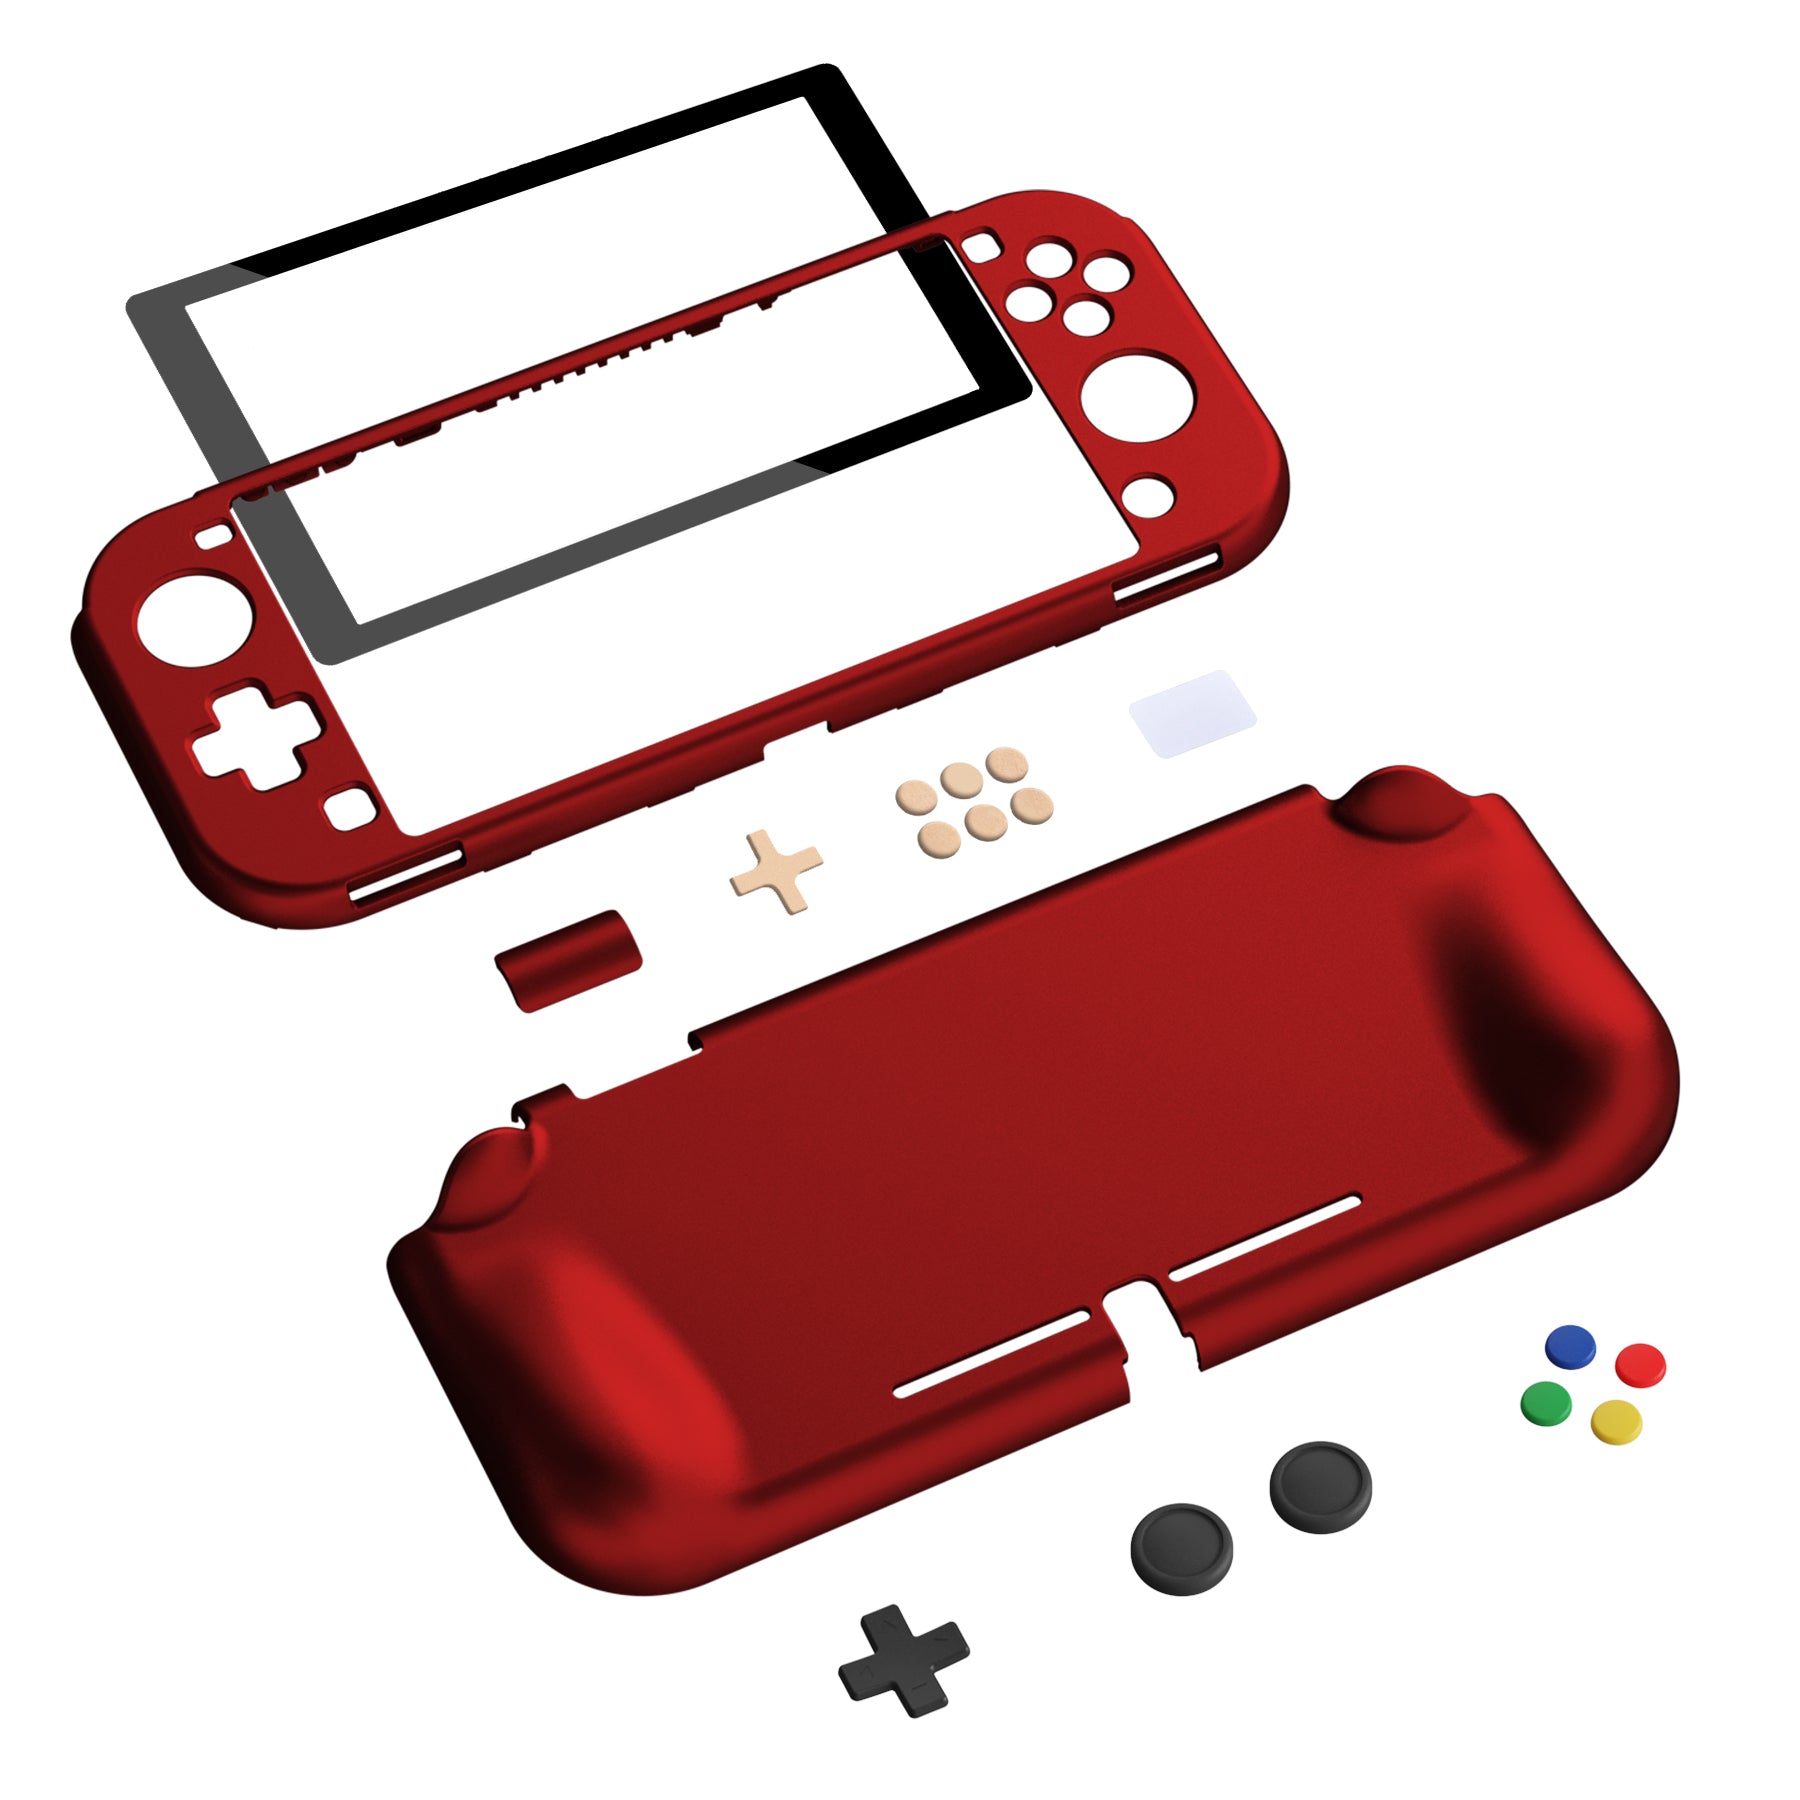 PlayVital ZealProtect Protective Case for Nintendo Switch Lite, Hard Shell Ergonomic Grip Cover for Nintendo Switch Lite w/Screen Protector & Thumb Grip Caps & Button Caps - Scarlet Red - PSLYP3010 playvital